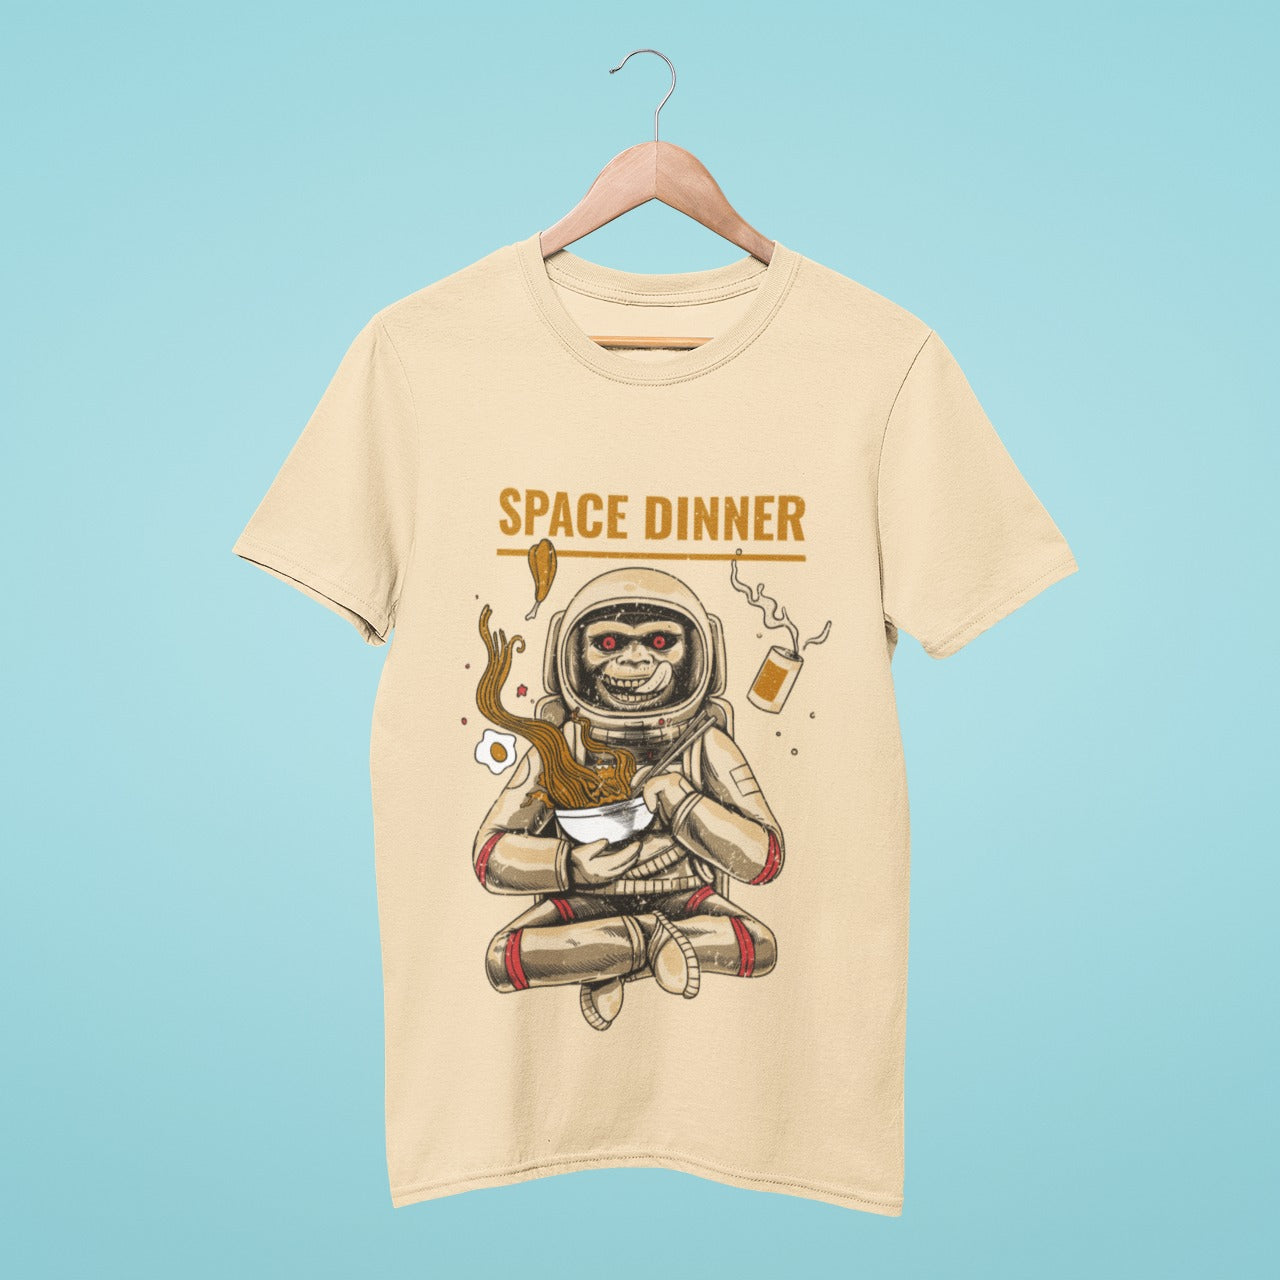 Elevate your wardrobe with our beige t-shirt featuring a playful monkey in a spacesuit enjoying dinner in space. The "Space Dinner" slogan adds a unique touch to this lighthearted design. Perfect for casual outings or as a gift for space enthusiasts. Add some humor to your wardrobe and order now!